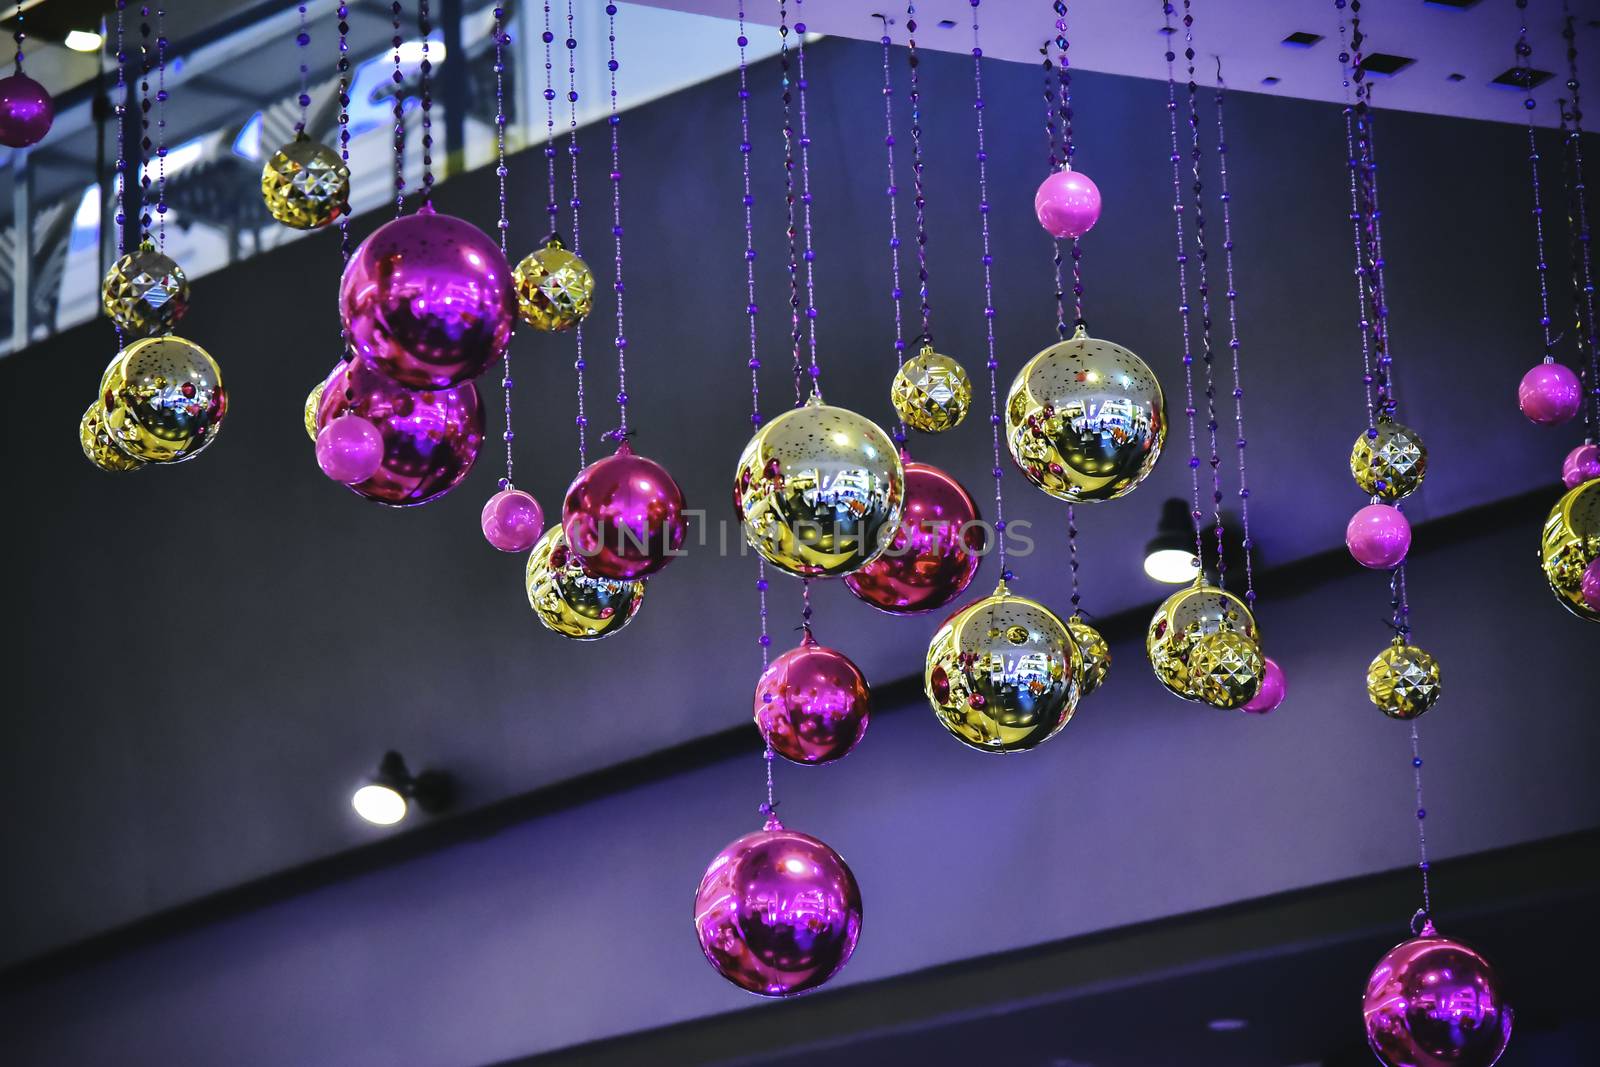 The christmas ball hangs beautifully during the festive season. by photobyphotoboy